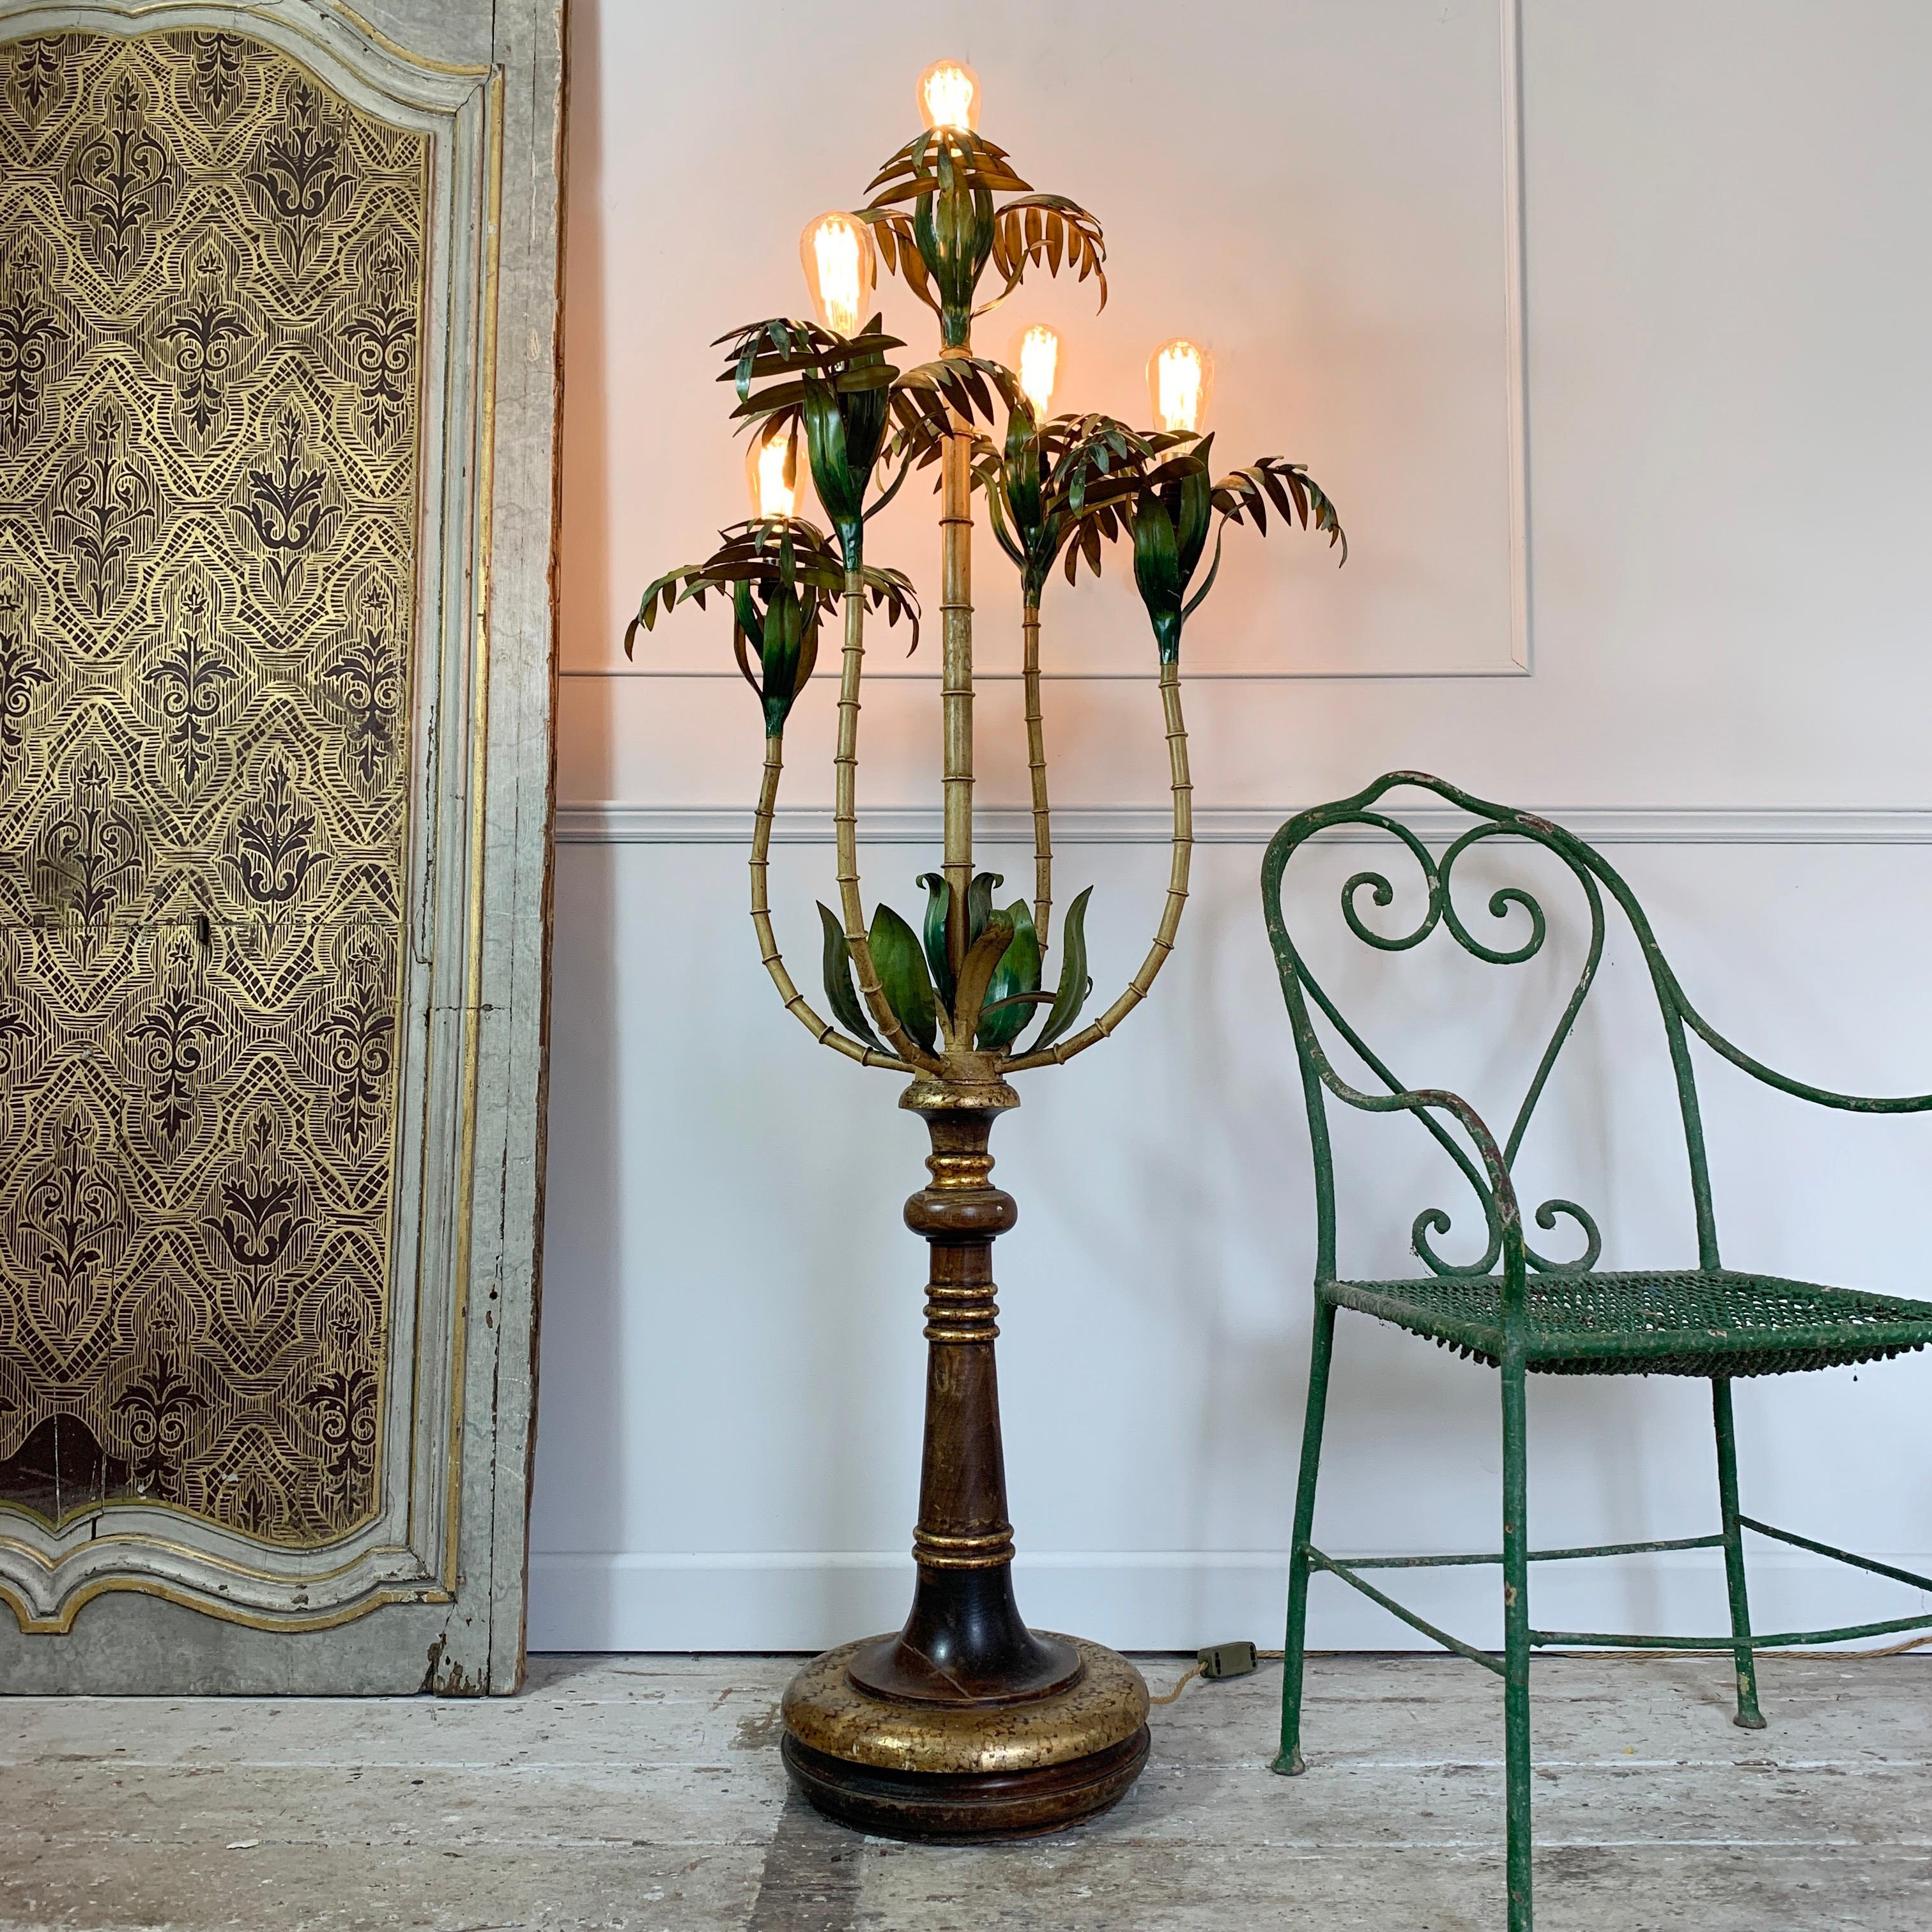 Rare and beautiful Italian 1950s tole floor lamp
This lamp is stunning and a large statement piece the top of the lamp is faux metal bamboo stems and palm leaf design
The base is beautifully carved solid wood with gilt detailing
There is